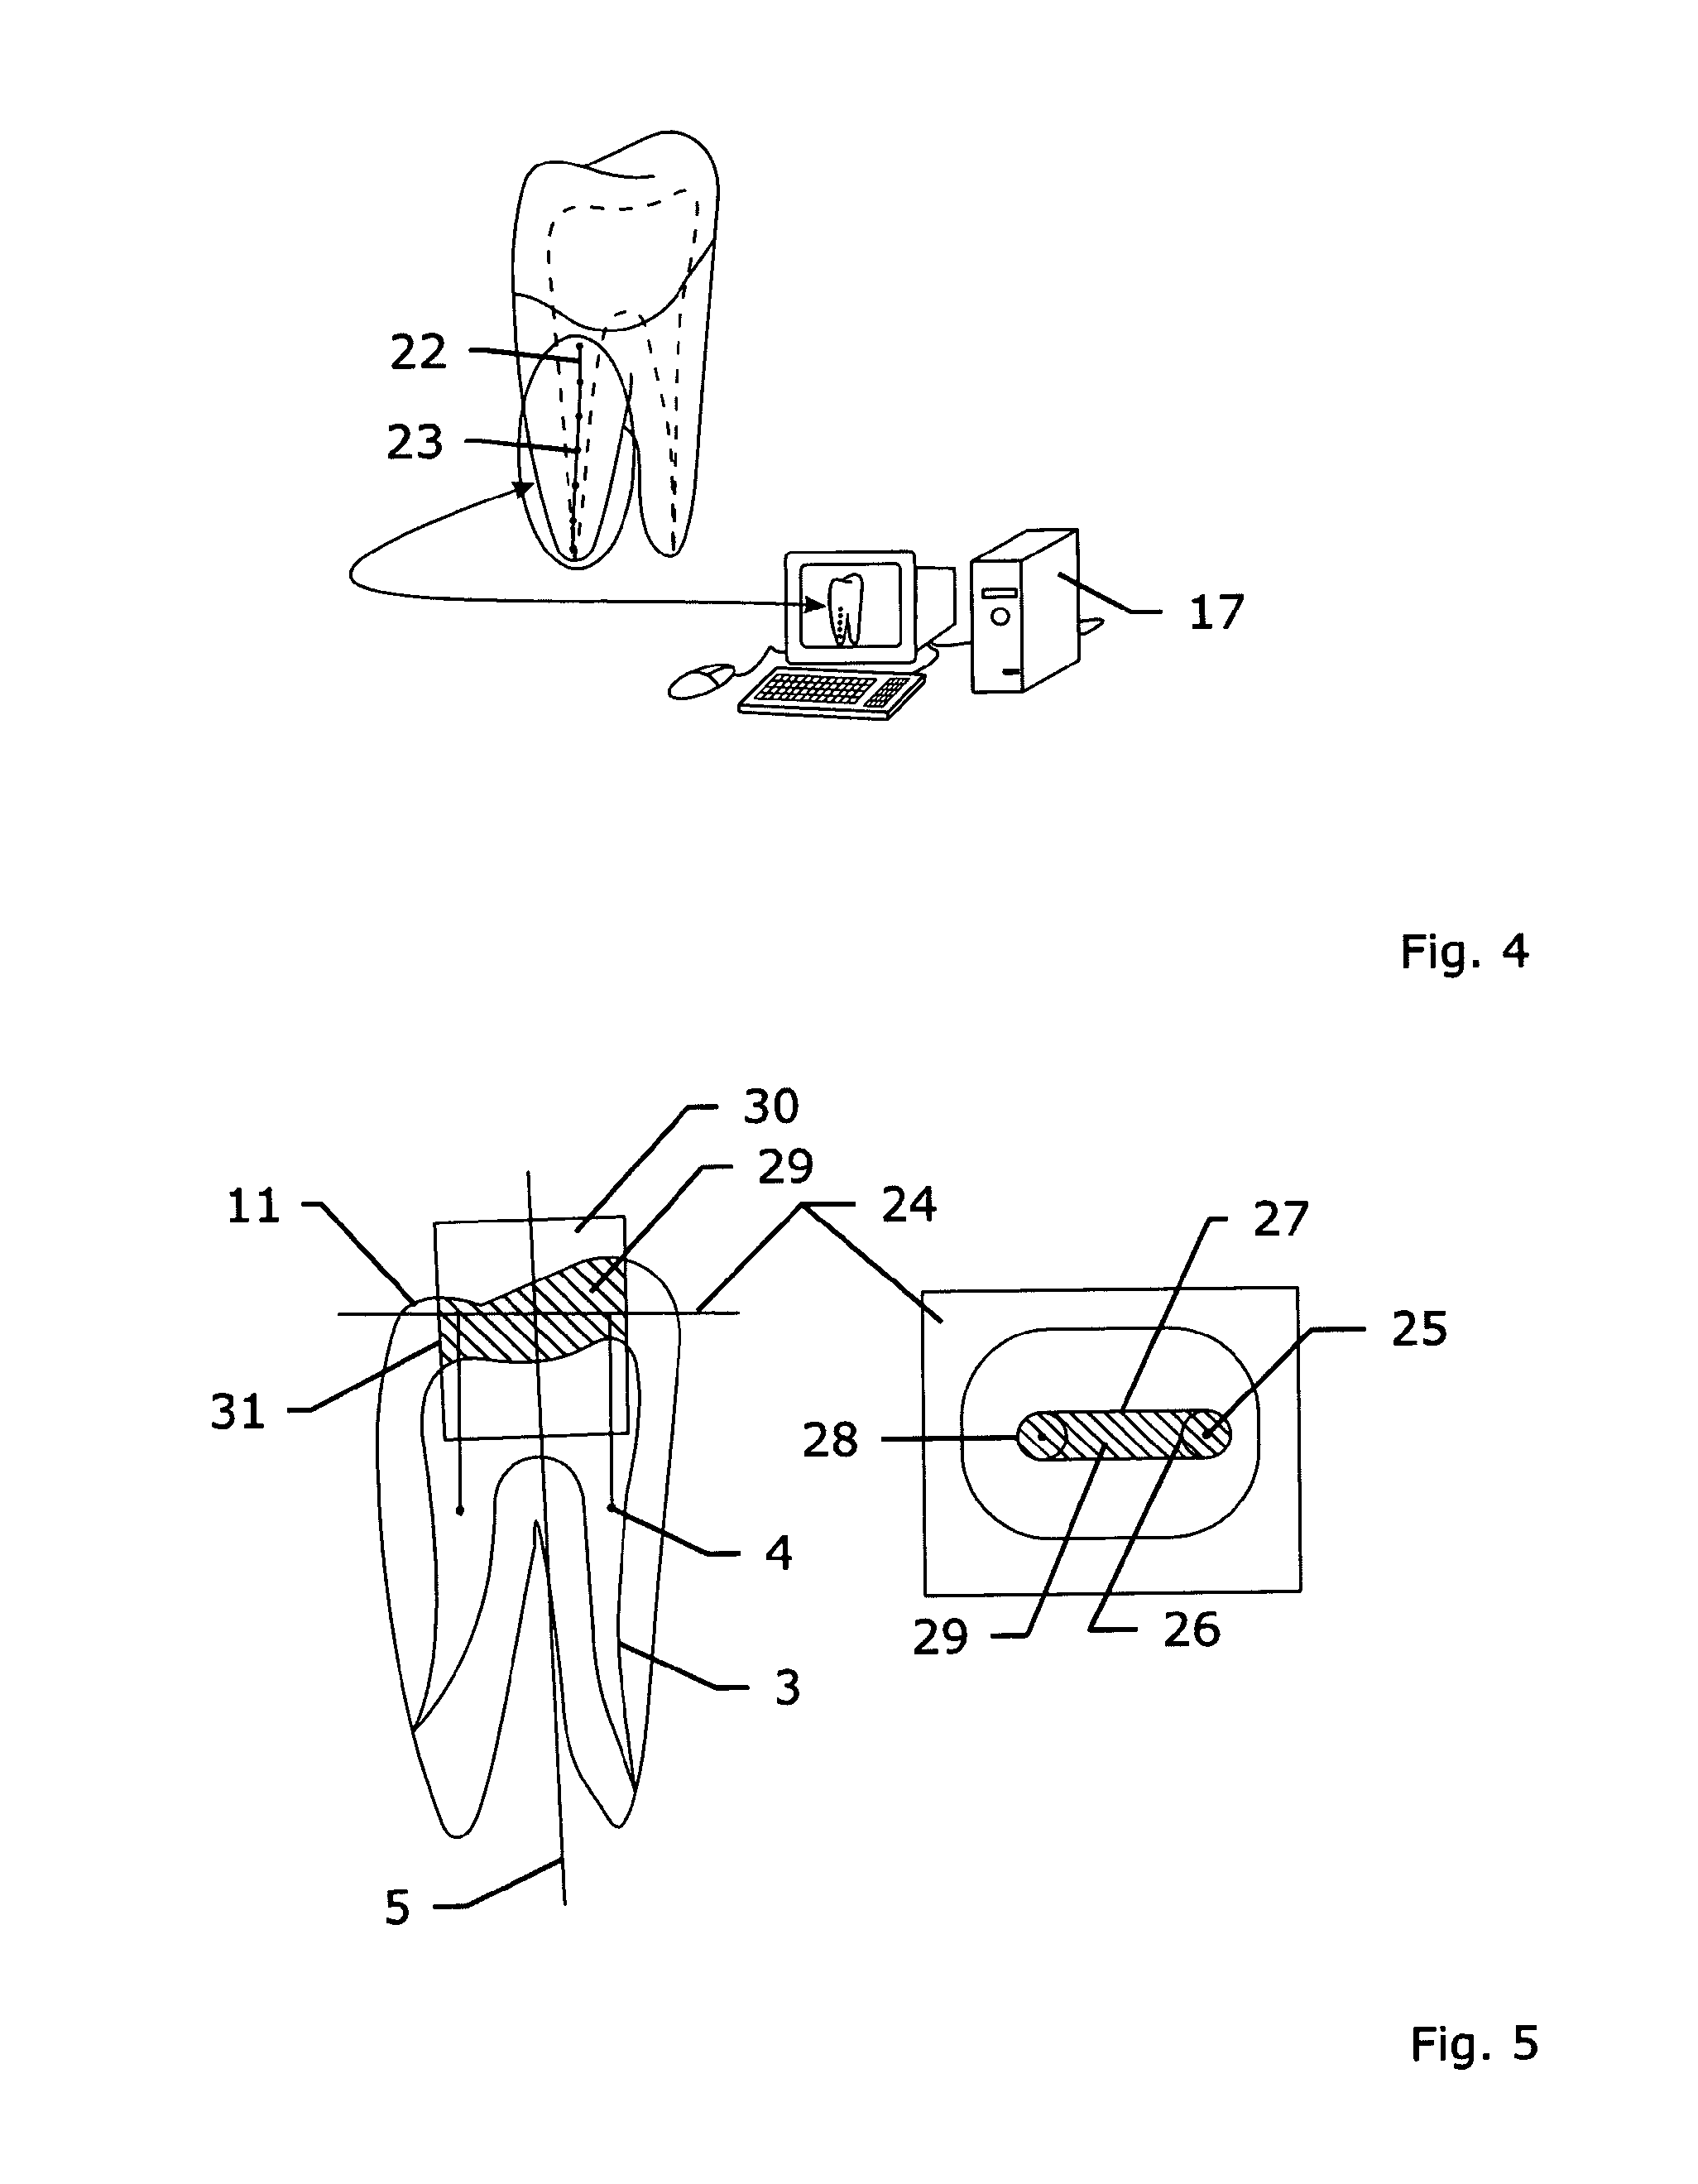 Method and system for establishing the shape of the occlusal access cavity in endodontic treatment